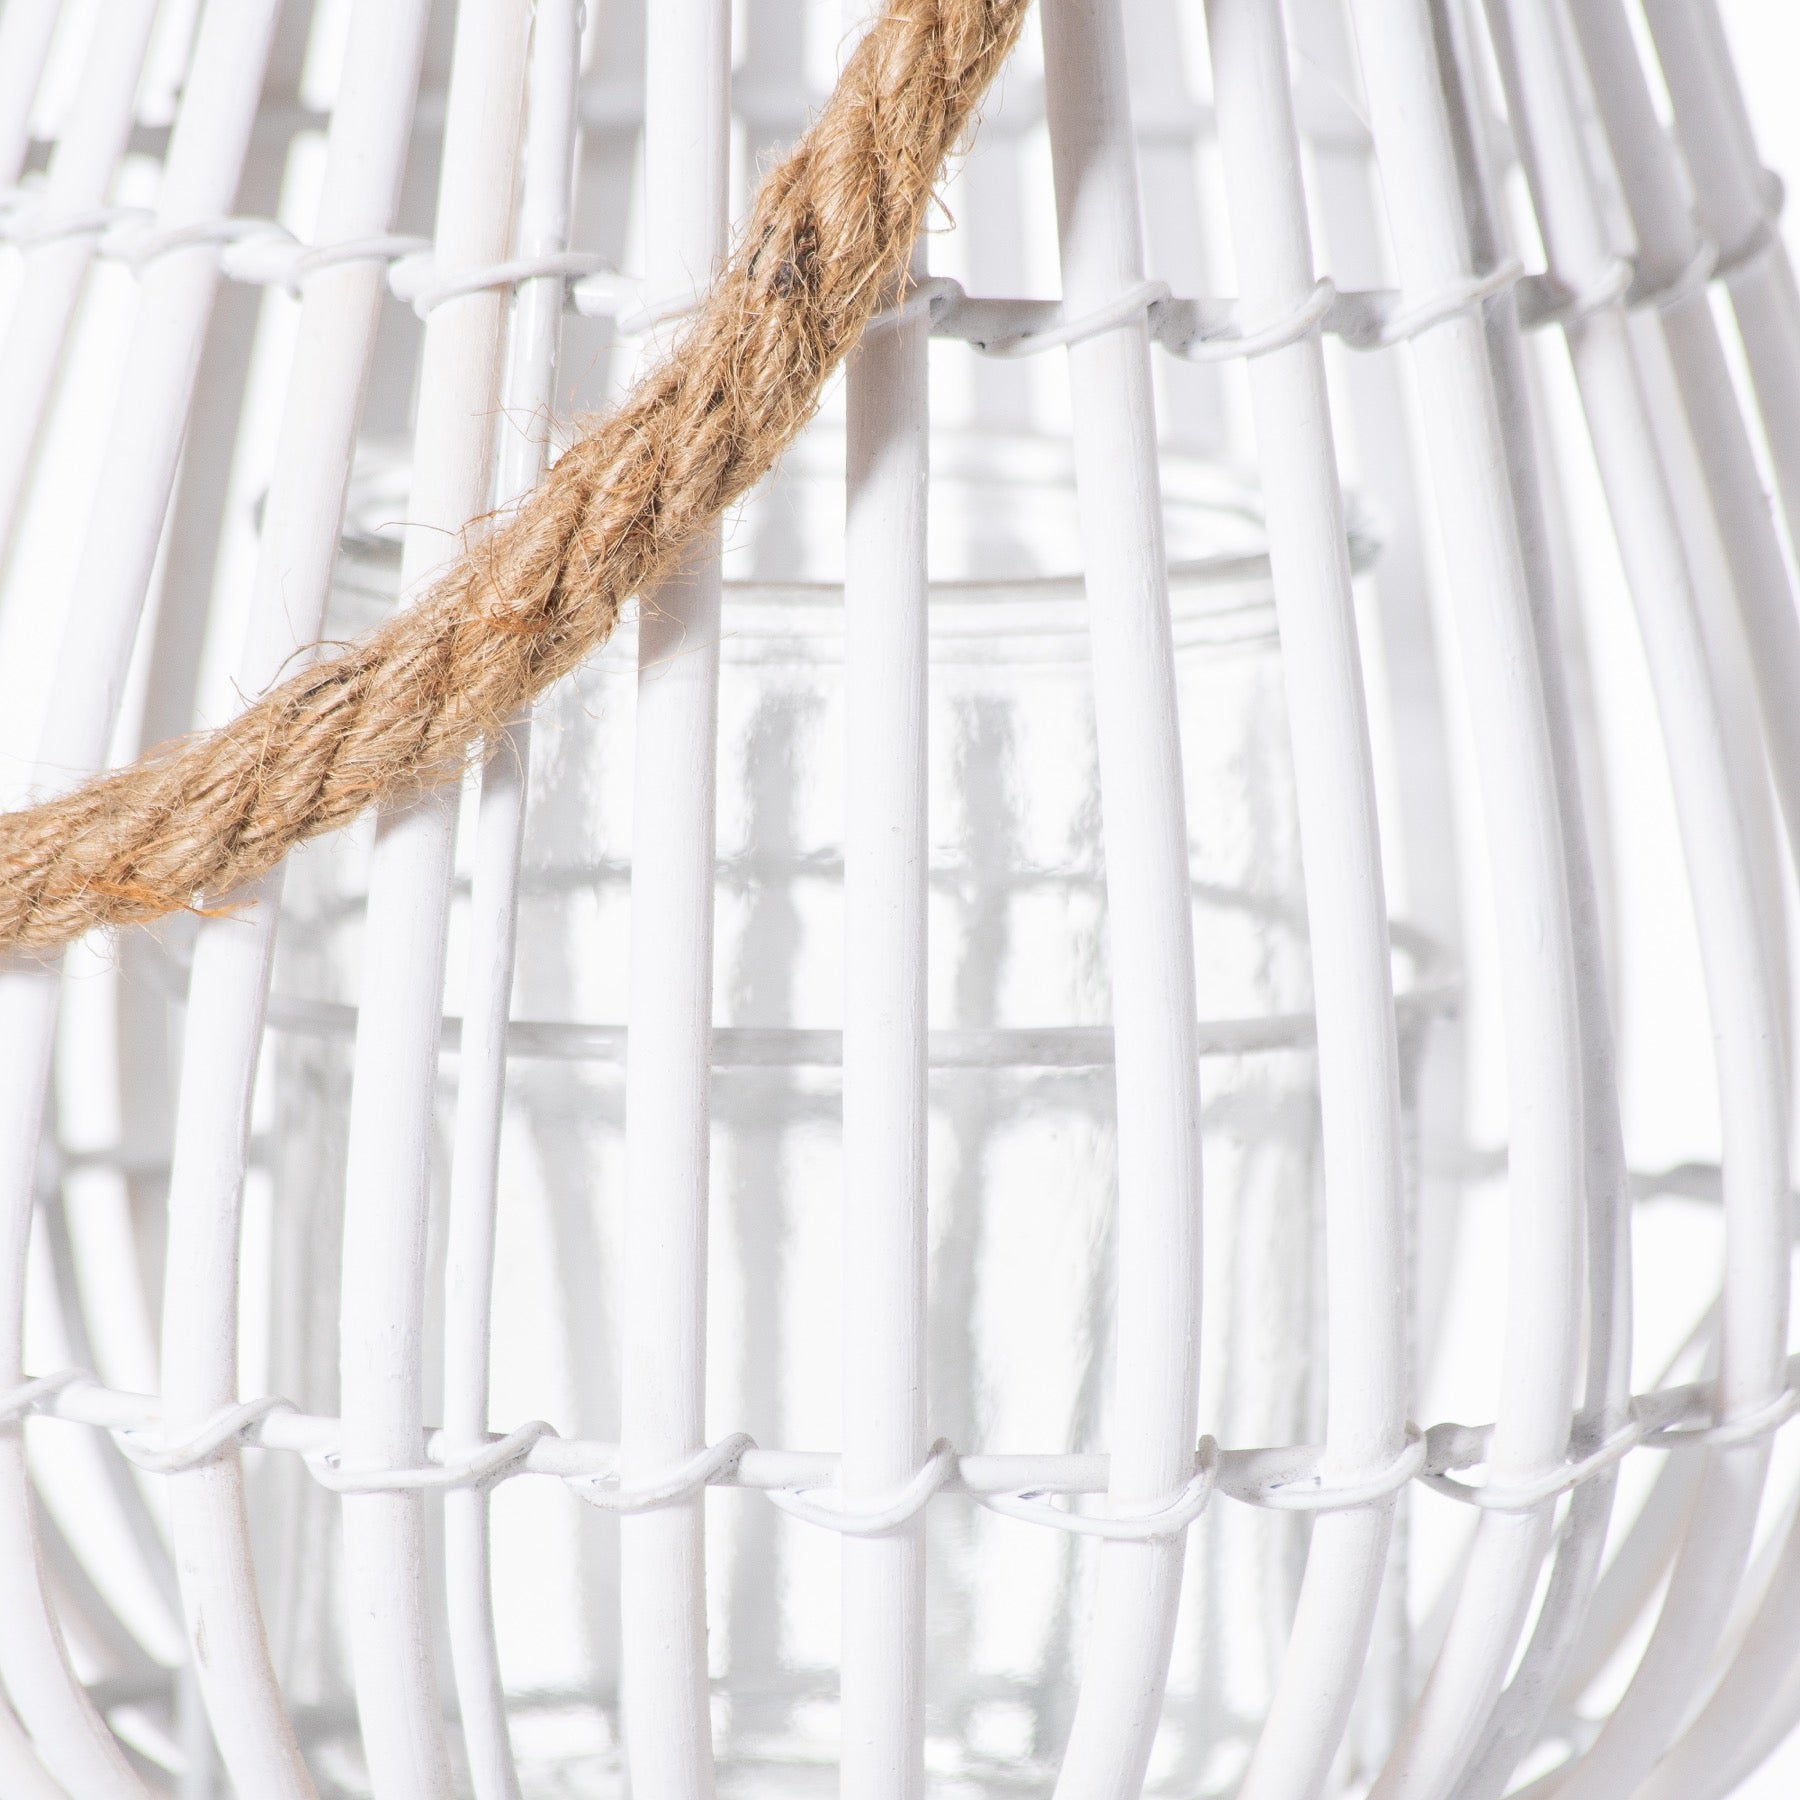 Small Domed White Rattan Lantern With Rope Detail